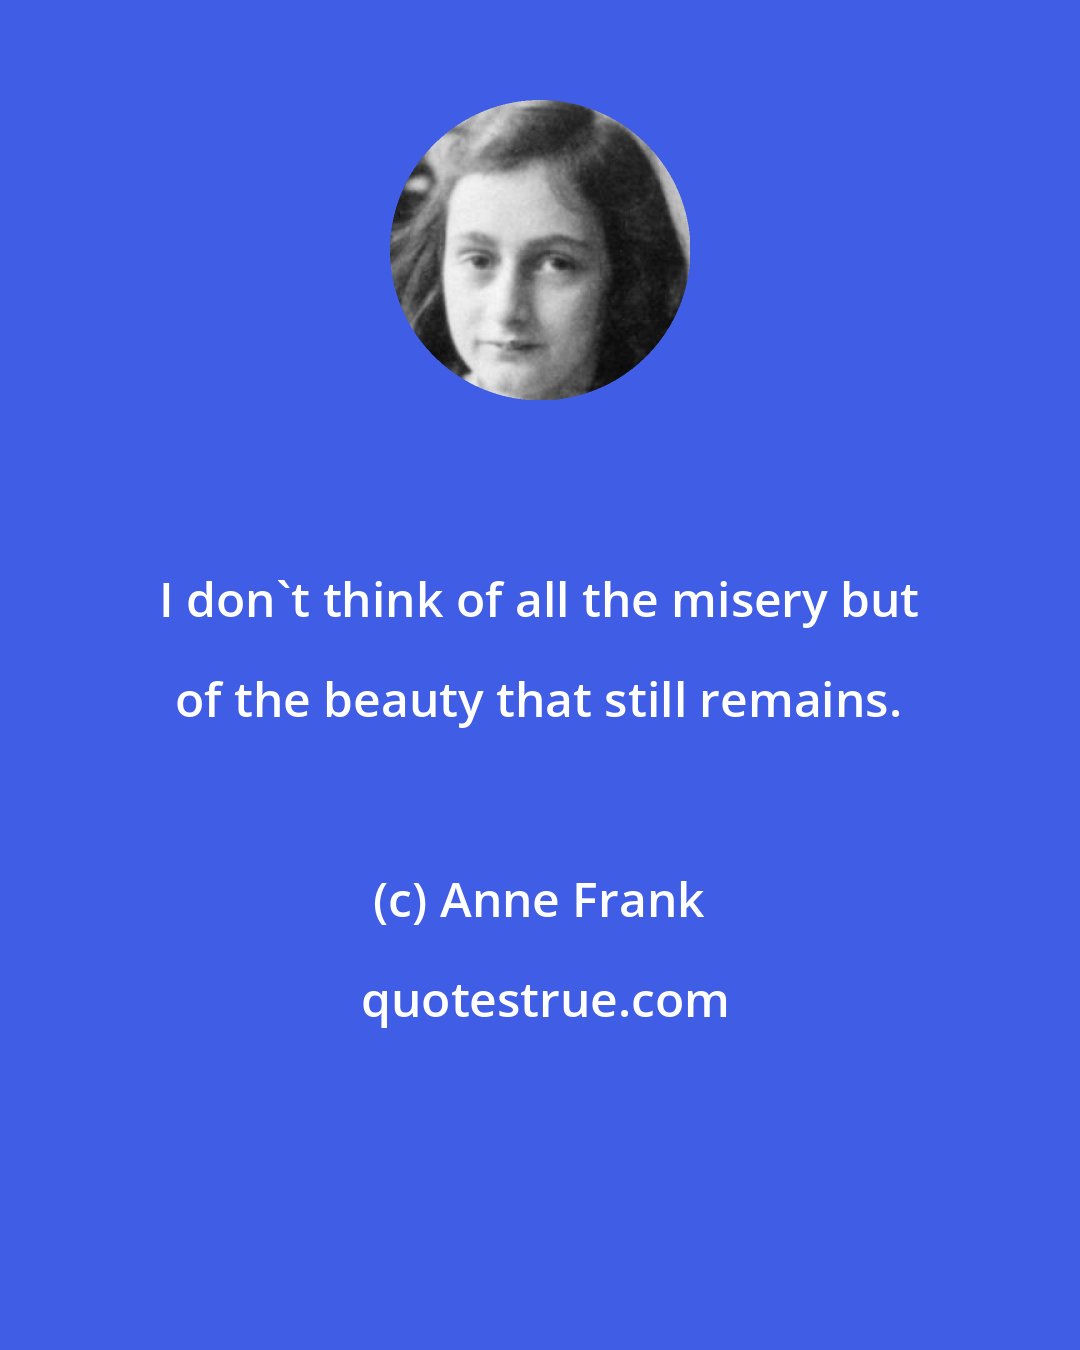 Anne Frank: I don't think of all the misery but of the beauty that still remains.